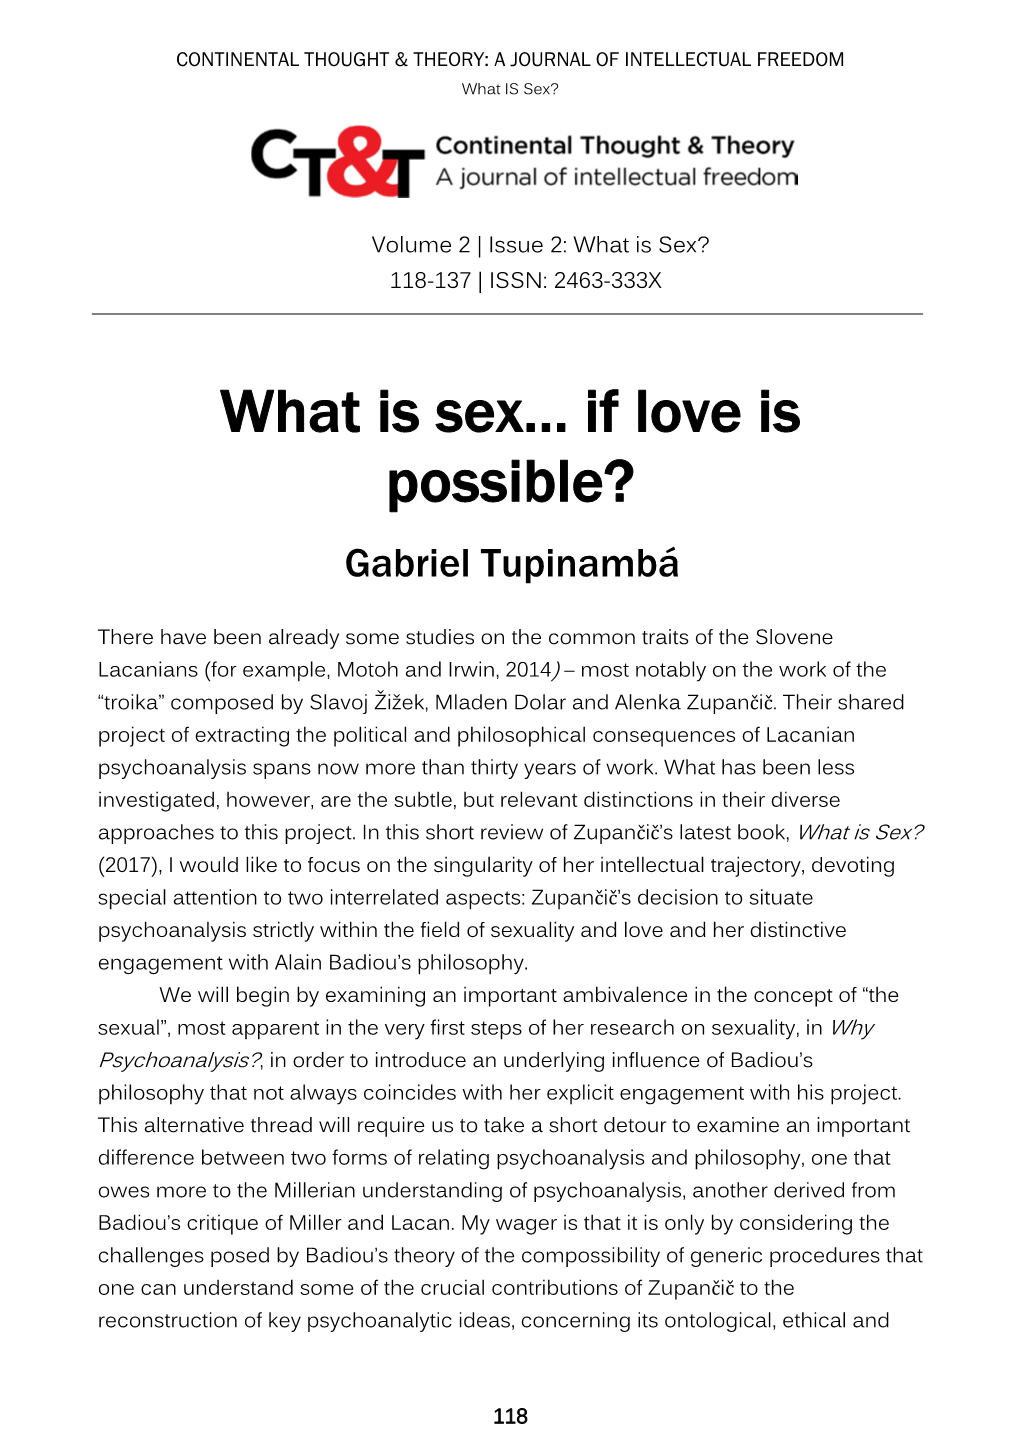 What Is Sex… If Love Is Possible?